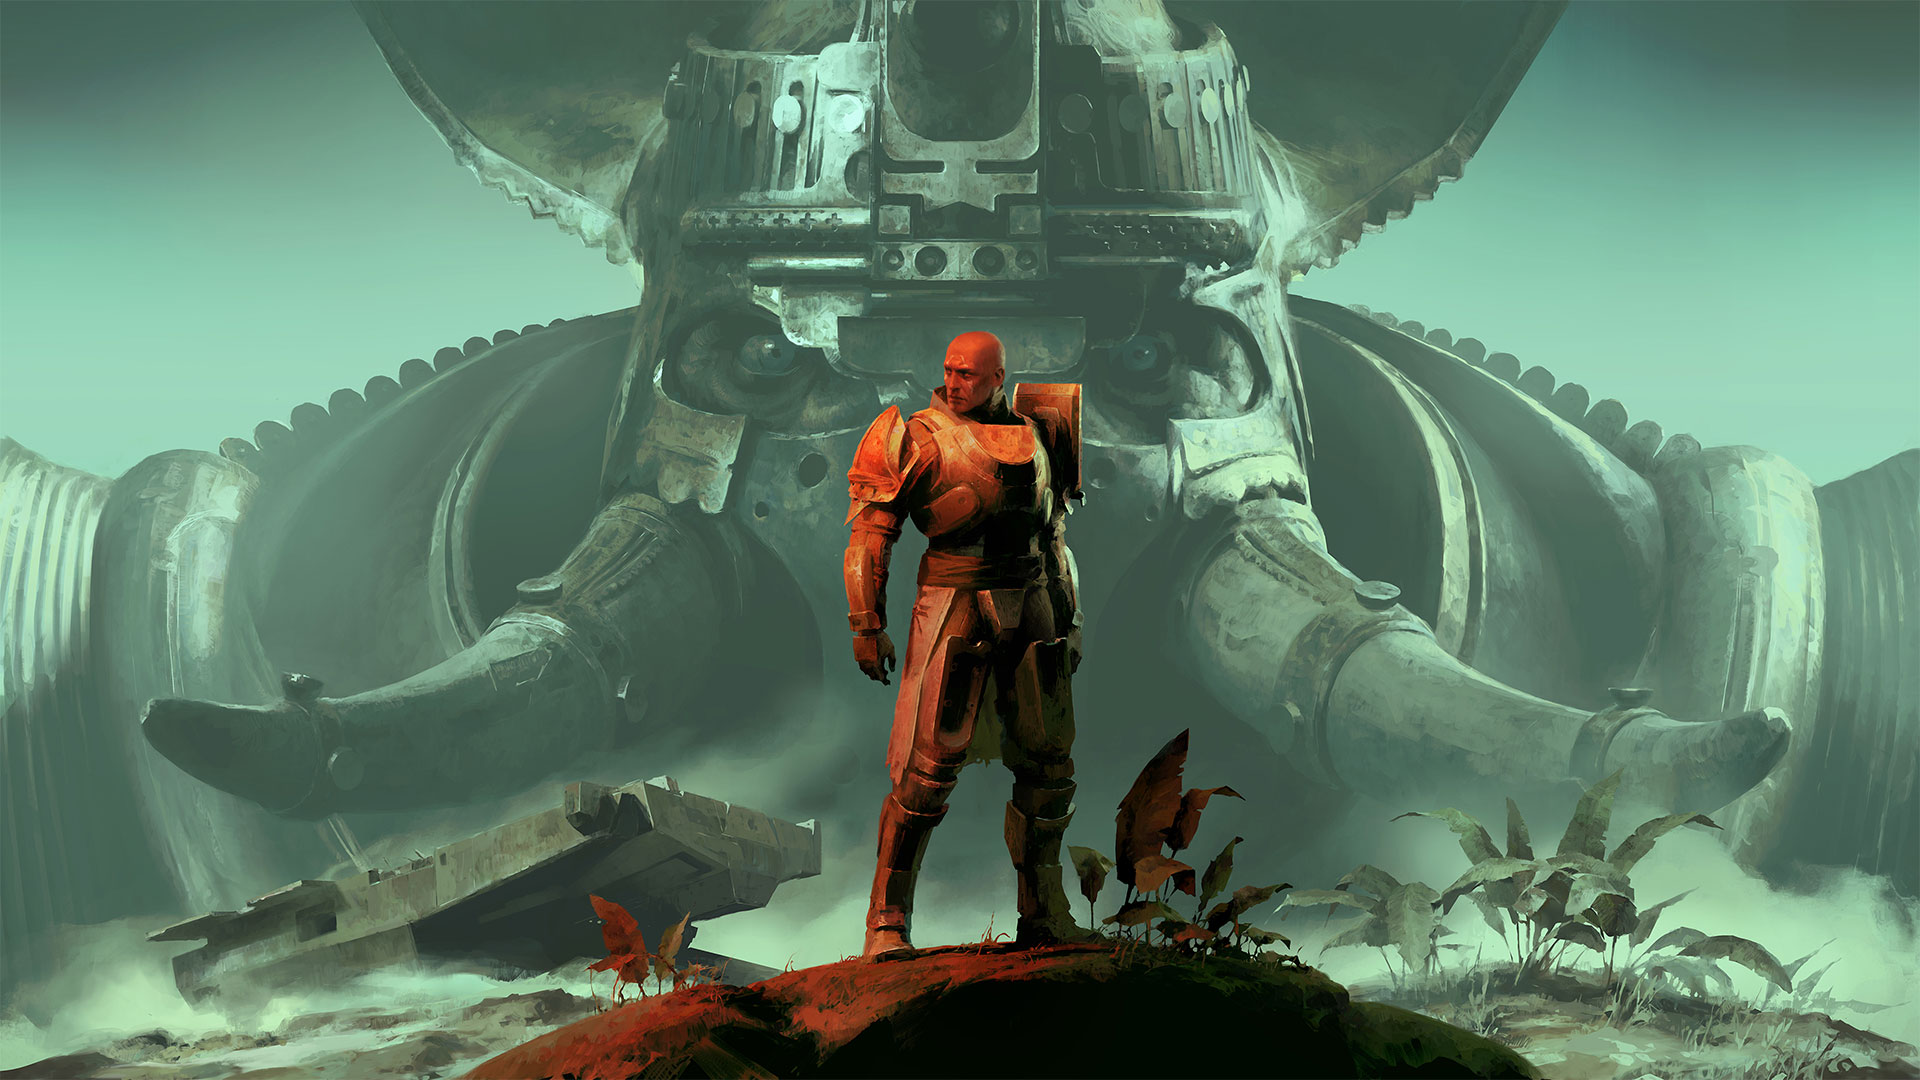 Key art for Season of the Chosem, showcasing Commander Zavala and the Cabal Empress Caiatl ominously in the background